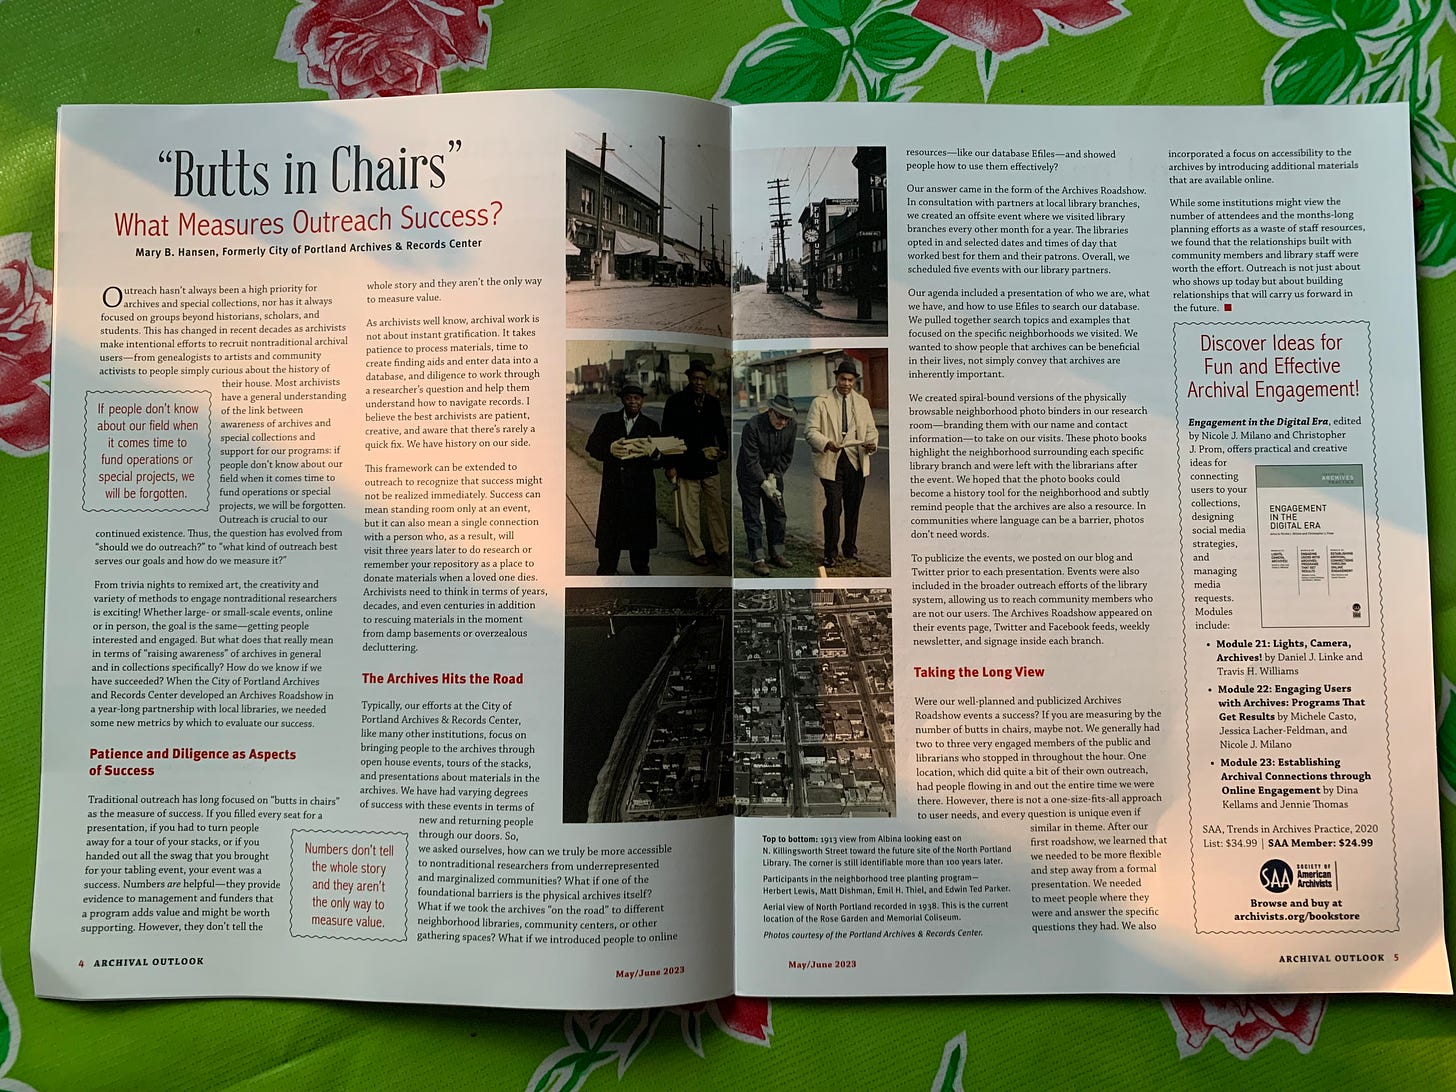 Magazine spread with text and images